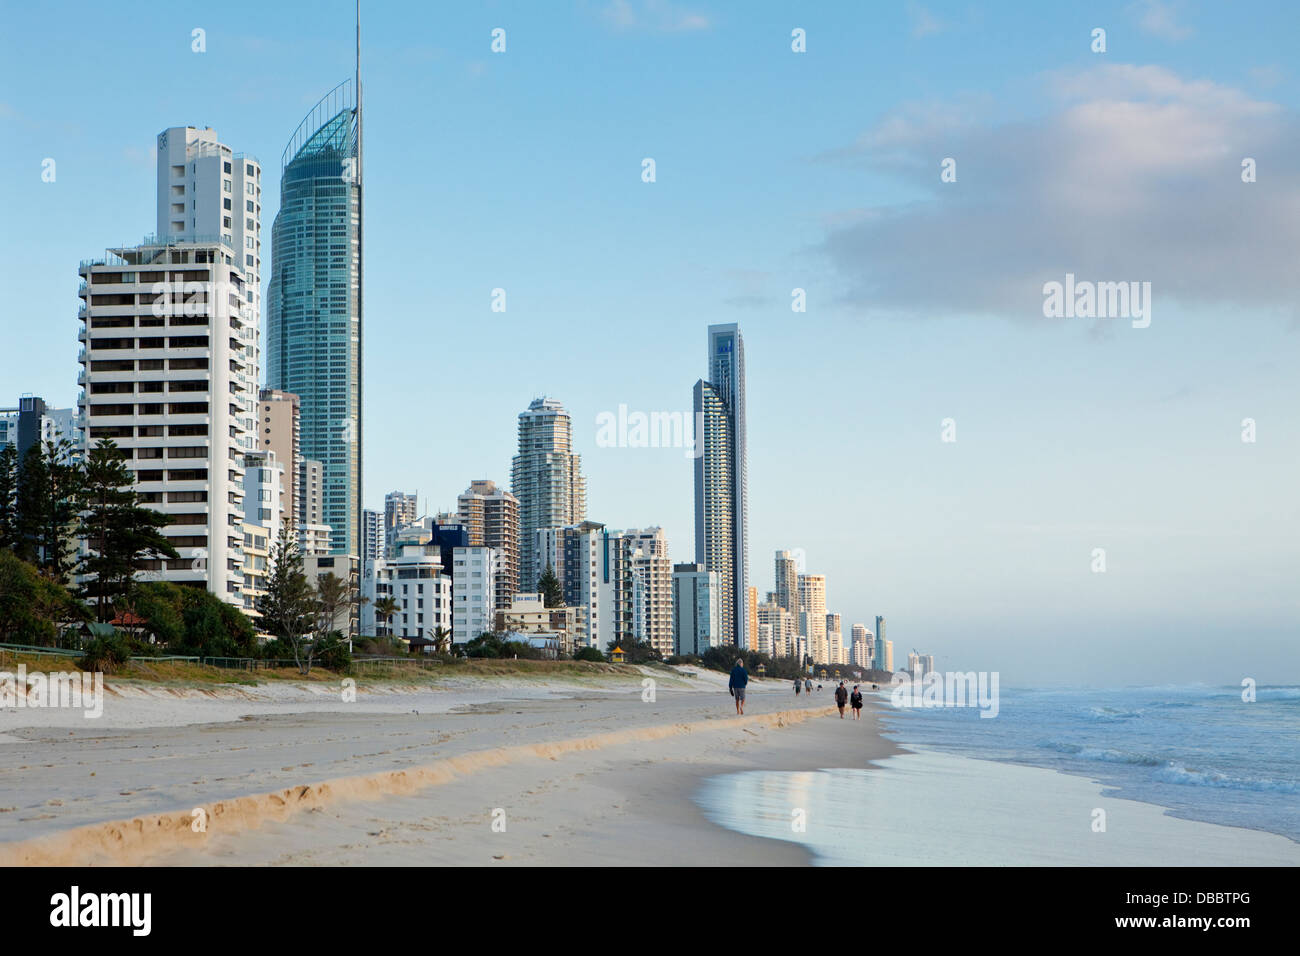 Dawn view of beach and city skyline at Surfers Paradise. Gold Coast, Queensland, Australia Stock Photo